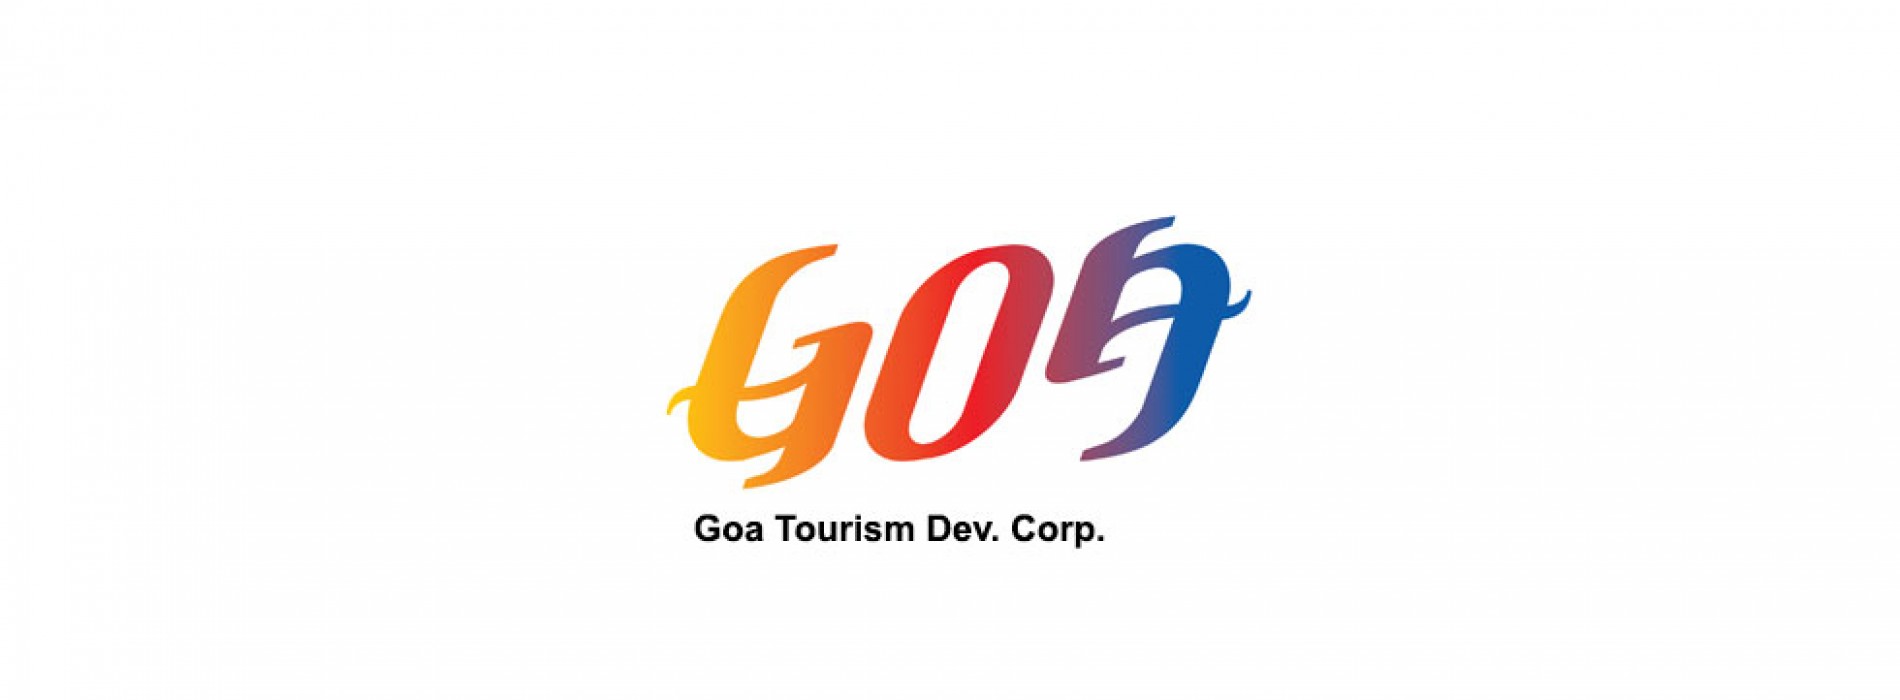 Goa set for new tourism ties with Croatia, Iceland and Israel